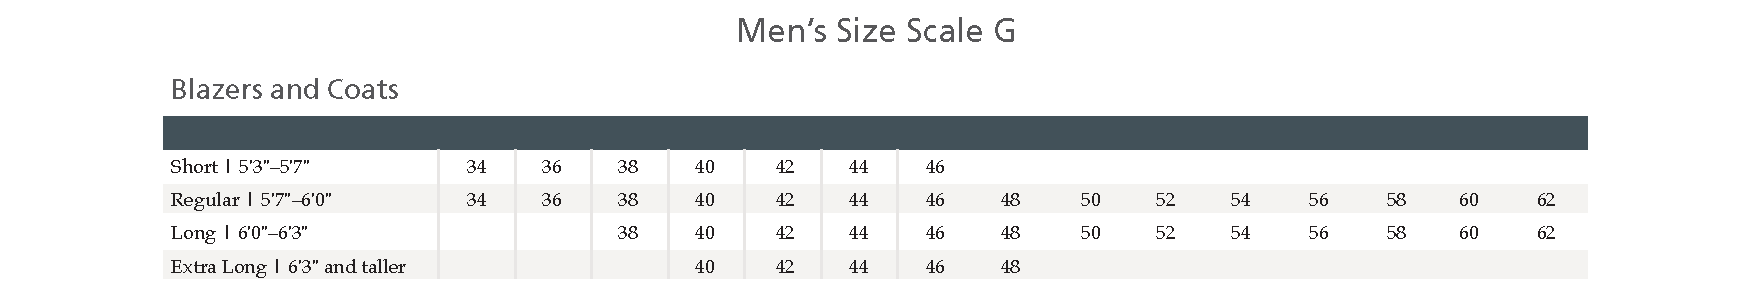 Size Scale G